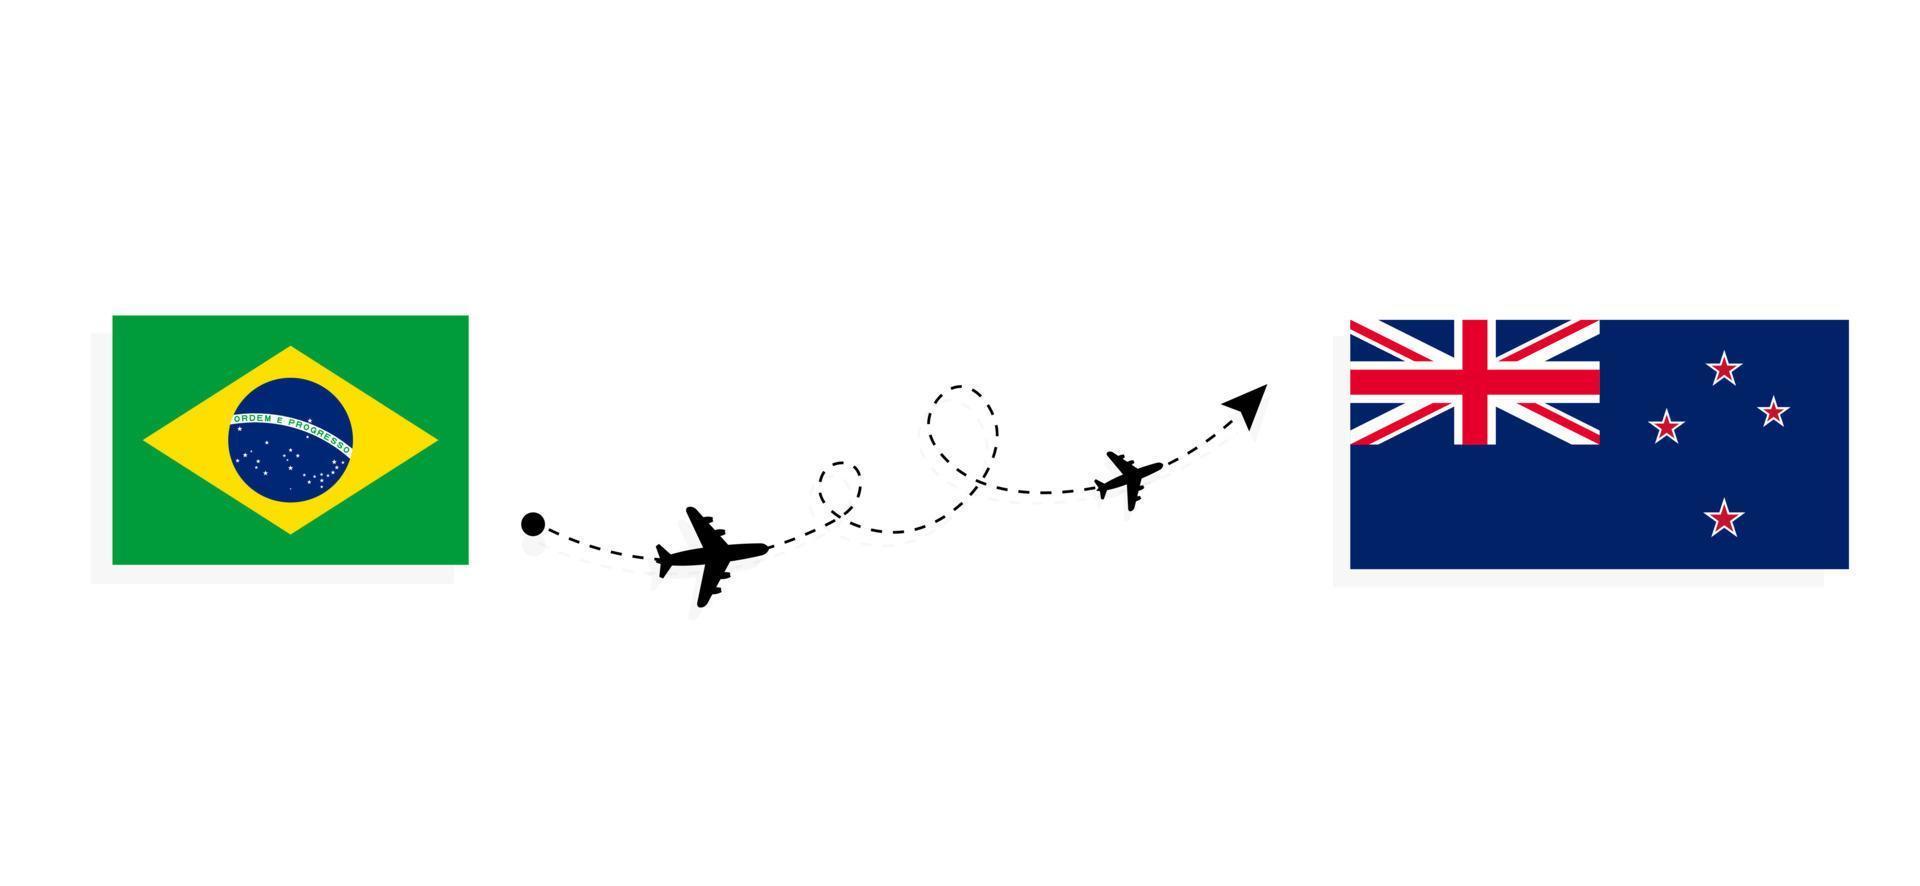 Flight and travel from Brazil to New Zealand by passenger airplane Travel concept vector